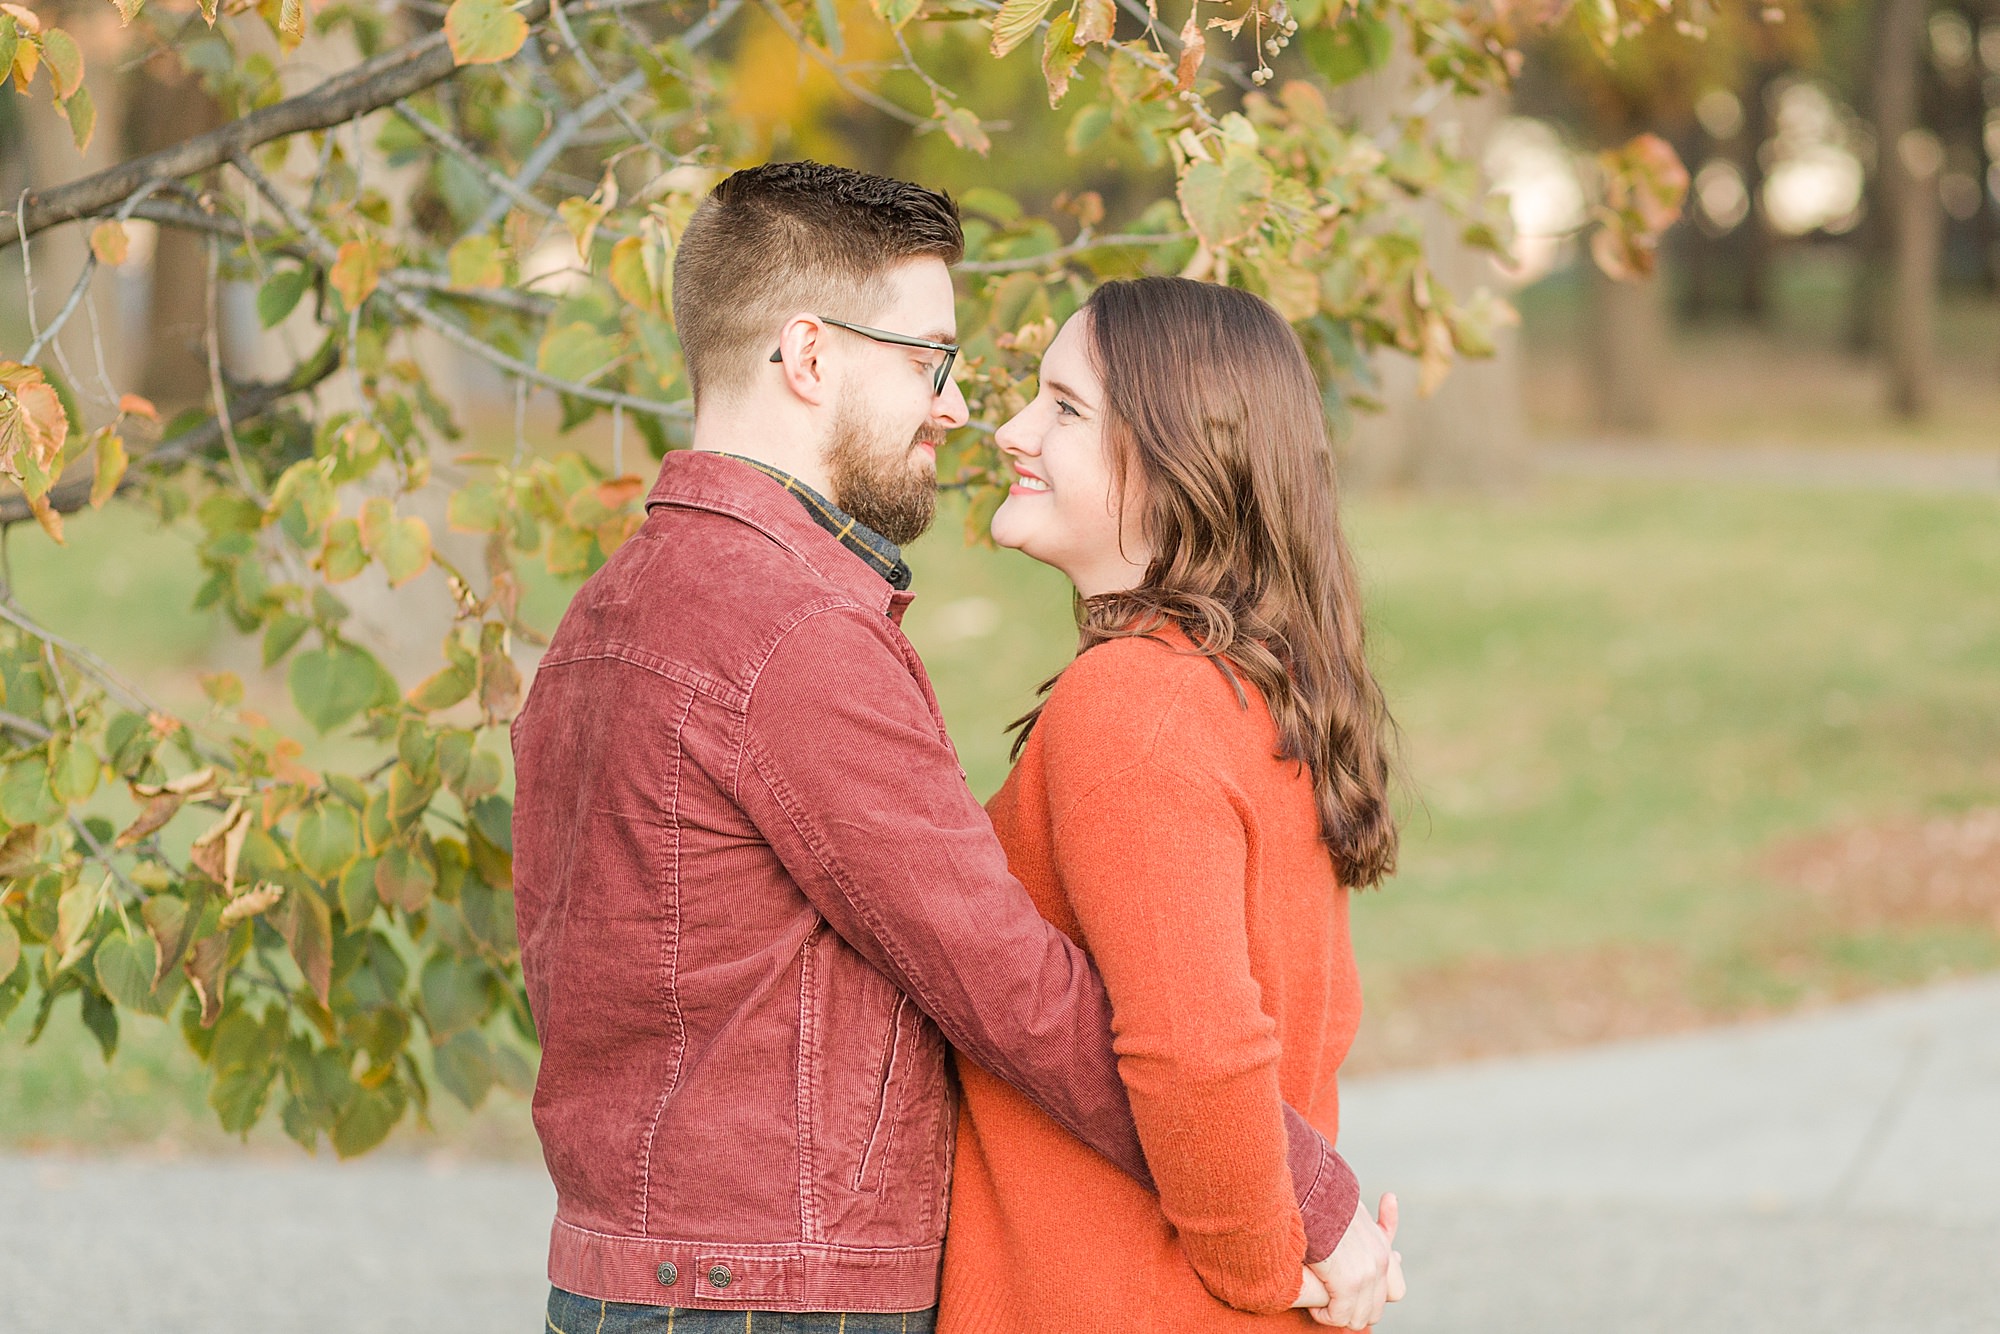 Couple in a park holding hands in shades of orange and red